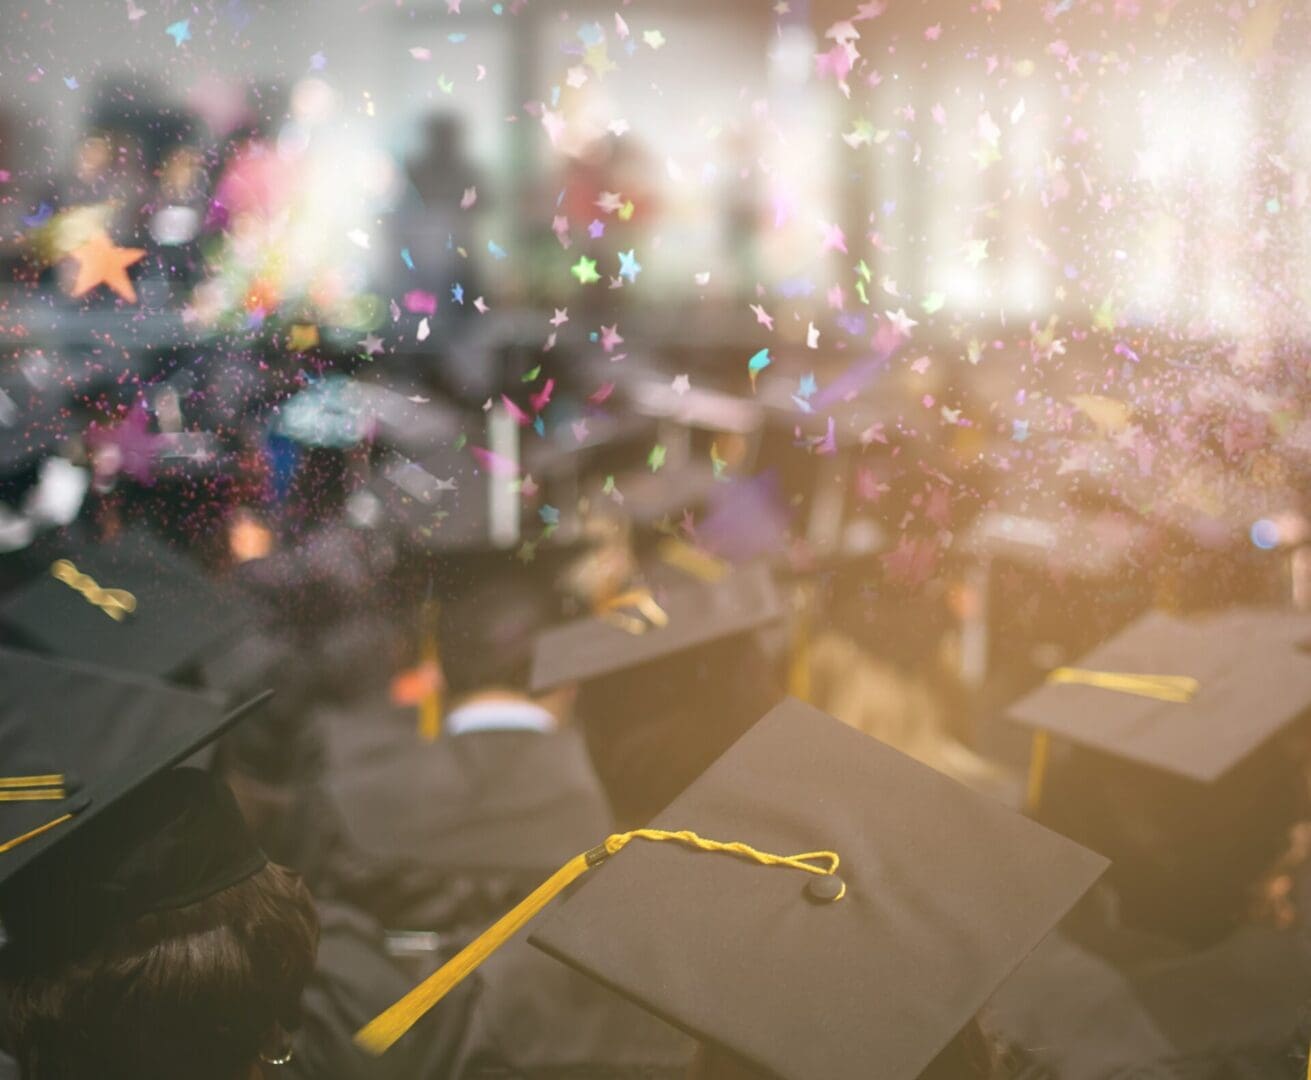 http://www.dreamstime.com/stock-images-graduation-day-education-concept-graduation-day-commencement-day-education-concept-image112550044